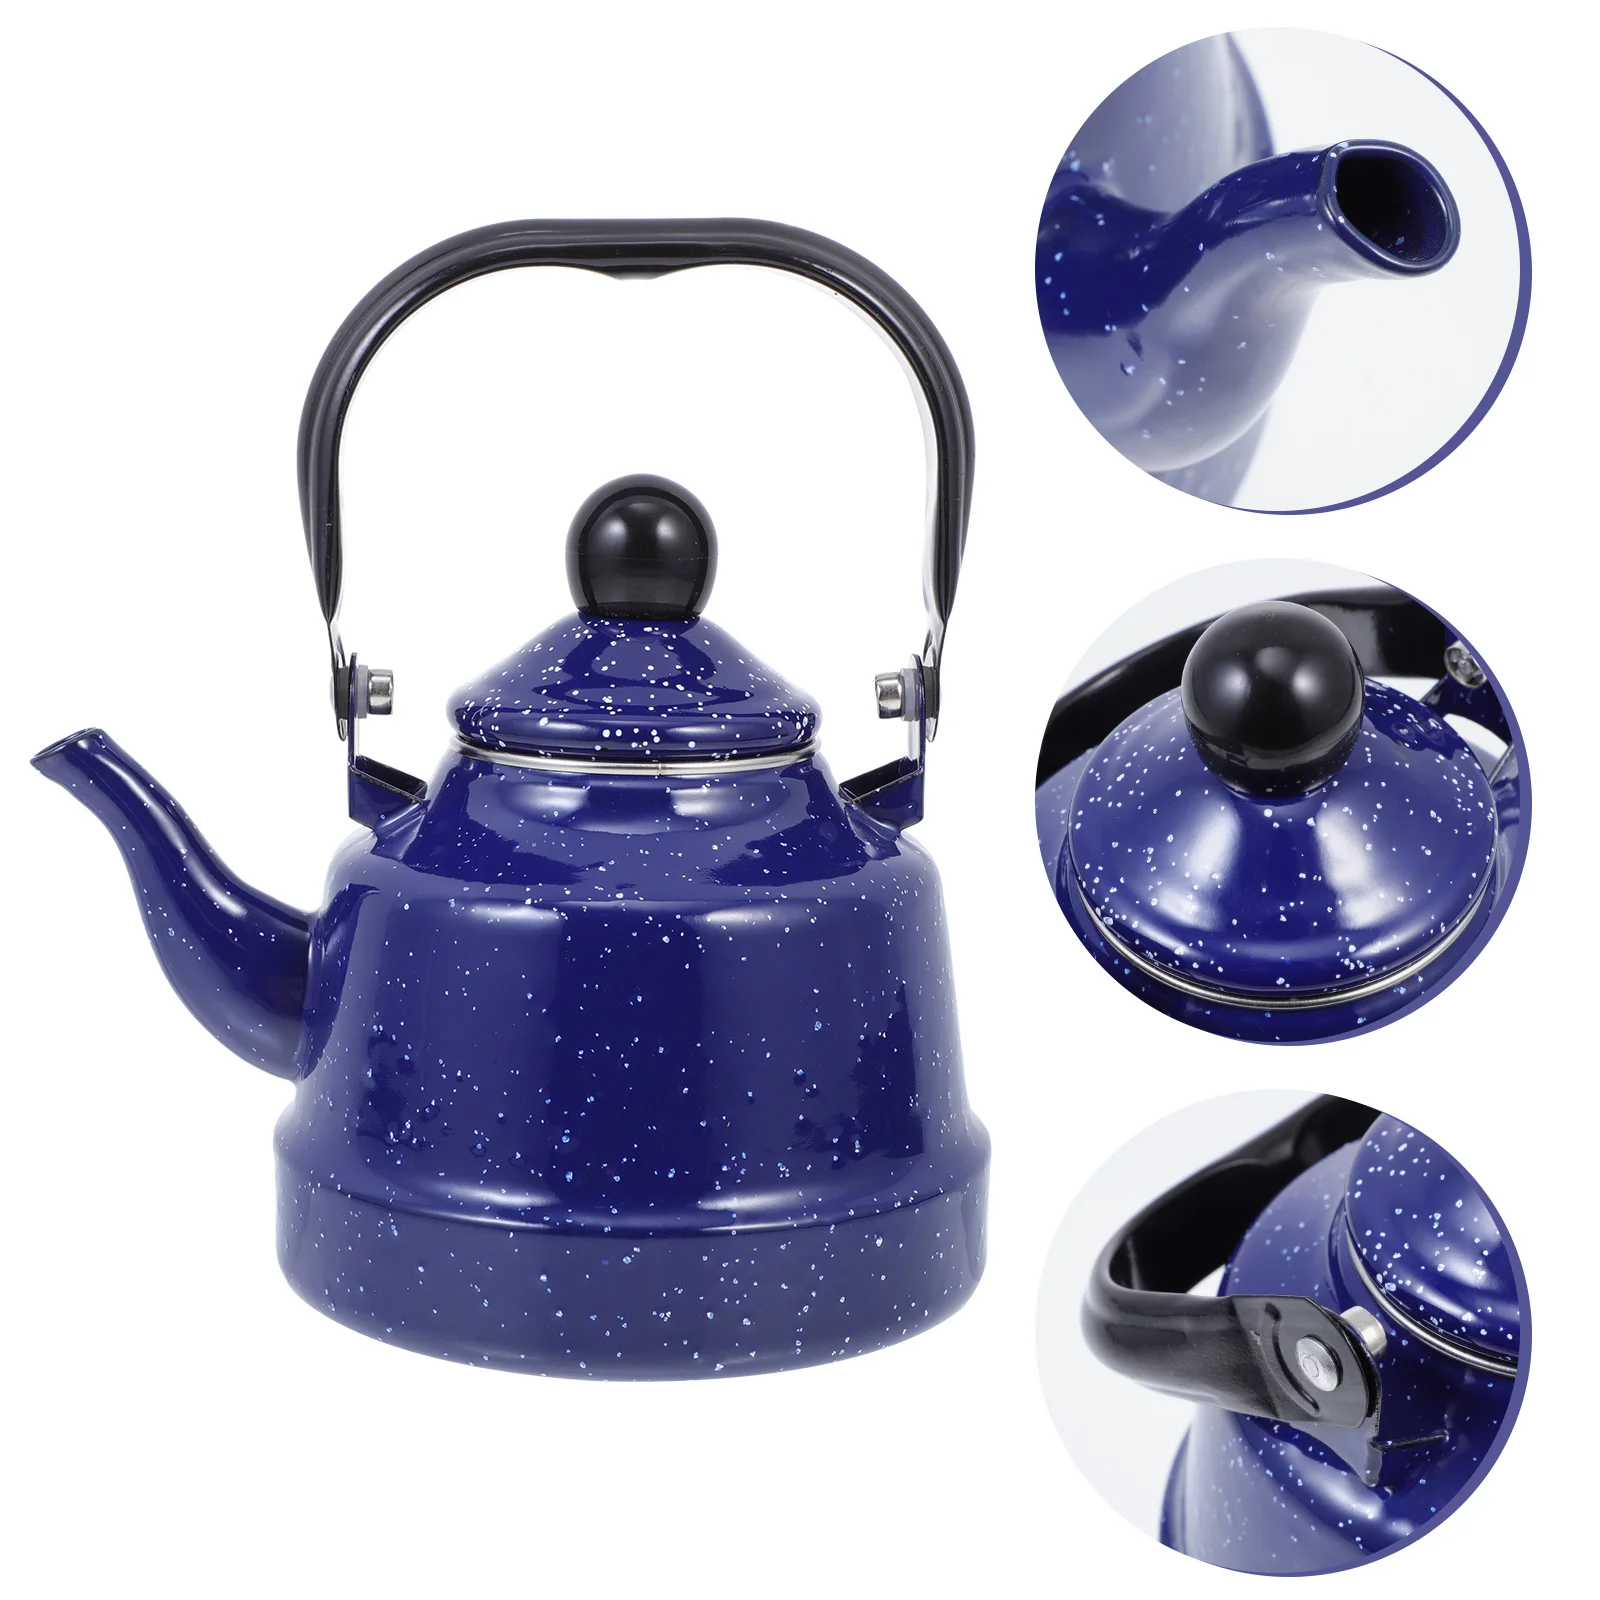 

Kettle Tea Teapot Pot Stovetop Water Enamel Boiling Steel Stove Top Whistling Ceramic Coffee Stainless Teakettle Hot Camping